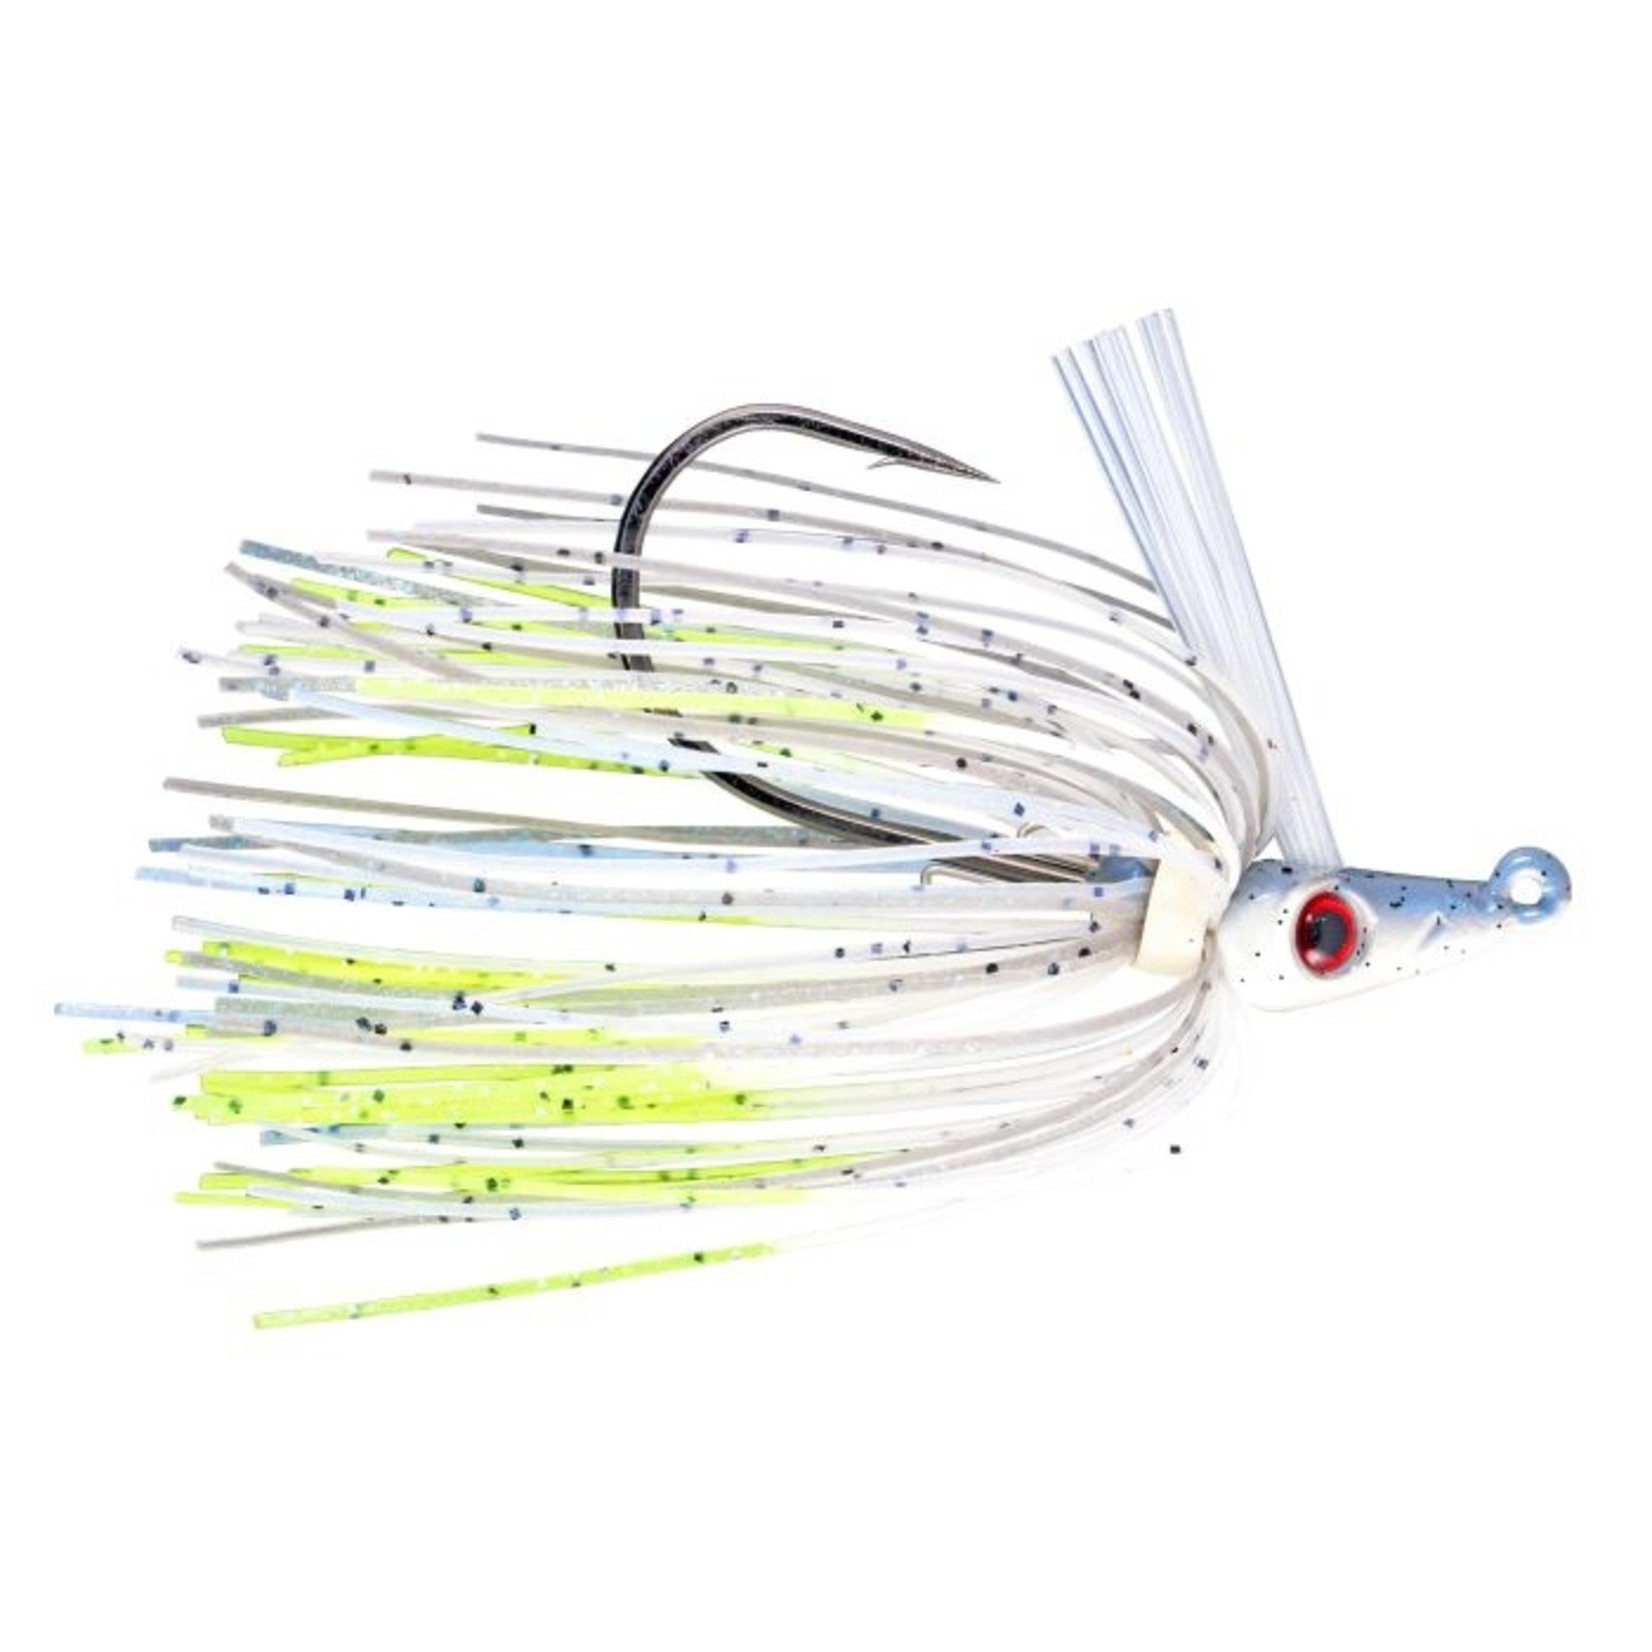 BOOYAH MOBSTER SWIM JIG 5/16 OZ THE NUMBERS